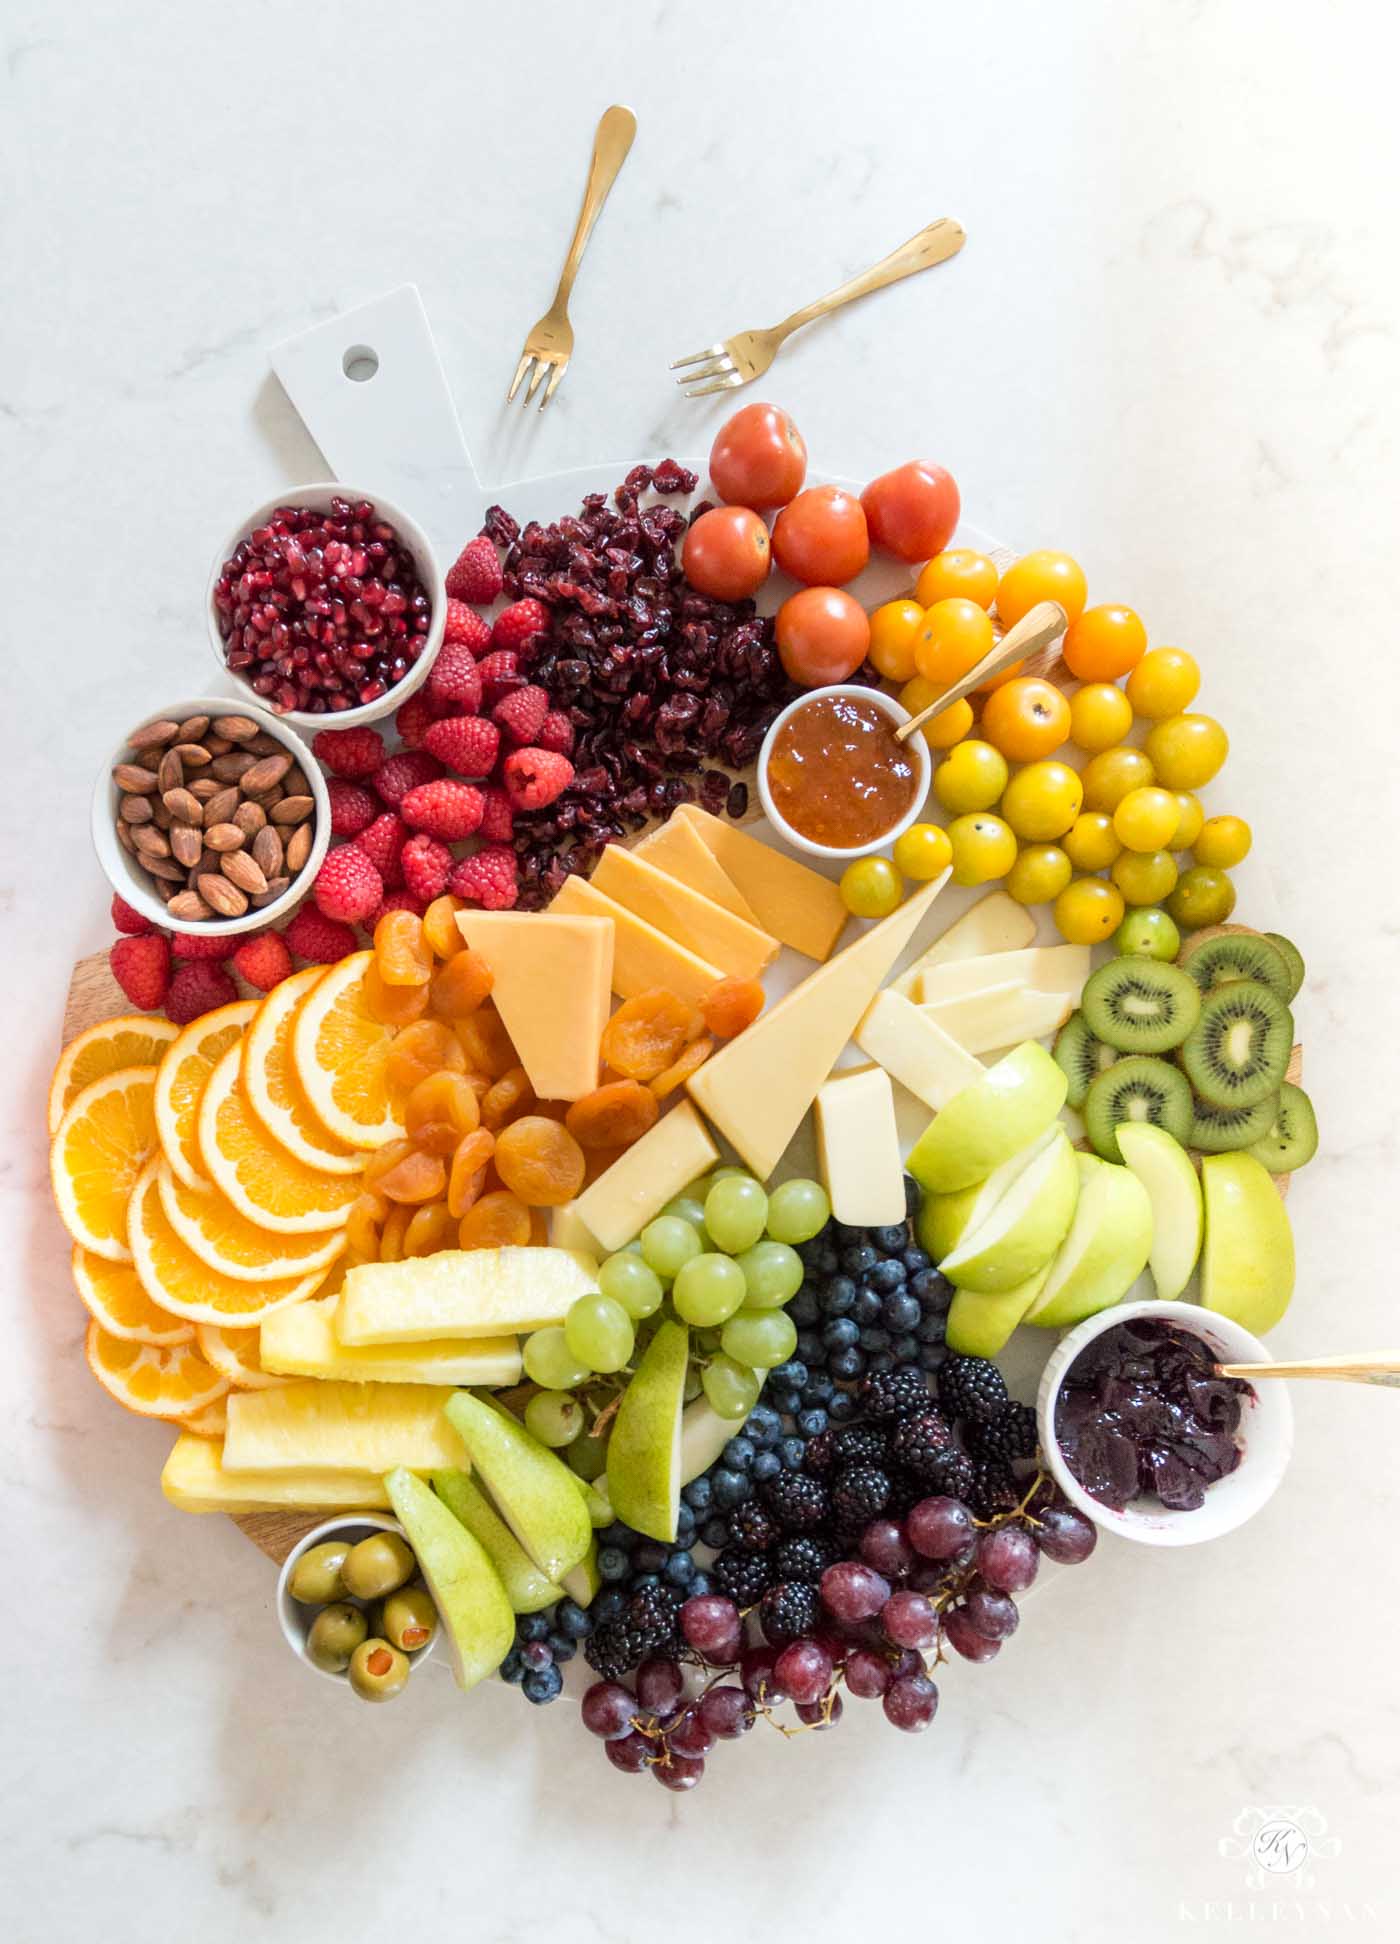 How to make a rainbow fruit and cheese board for St. Patrick's day or any party!